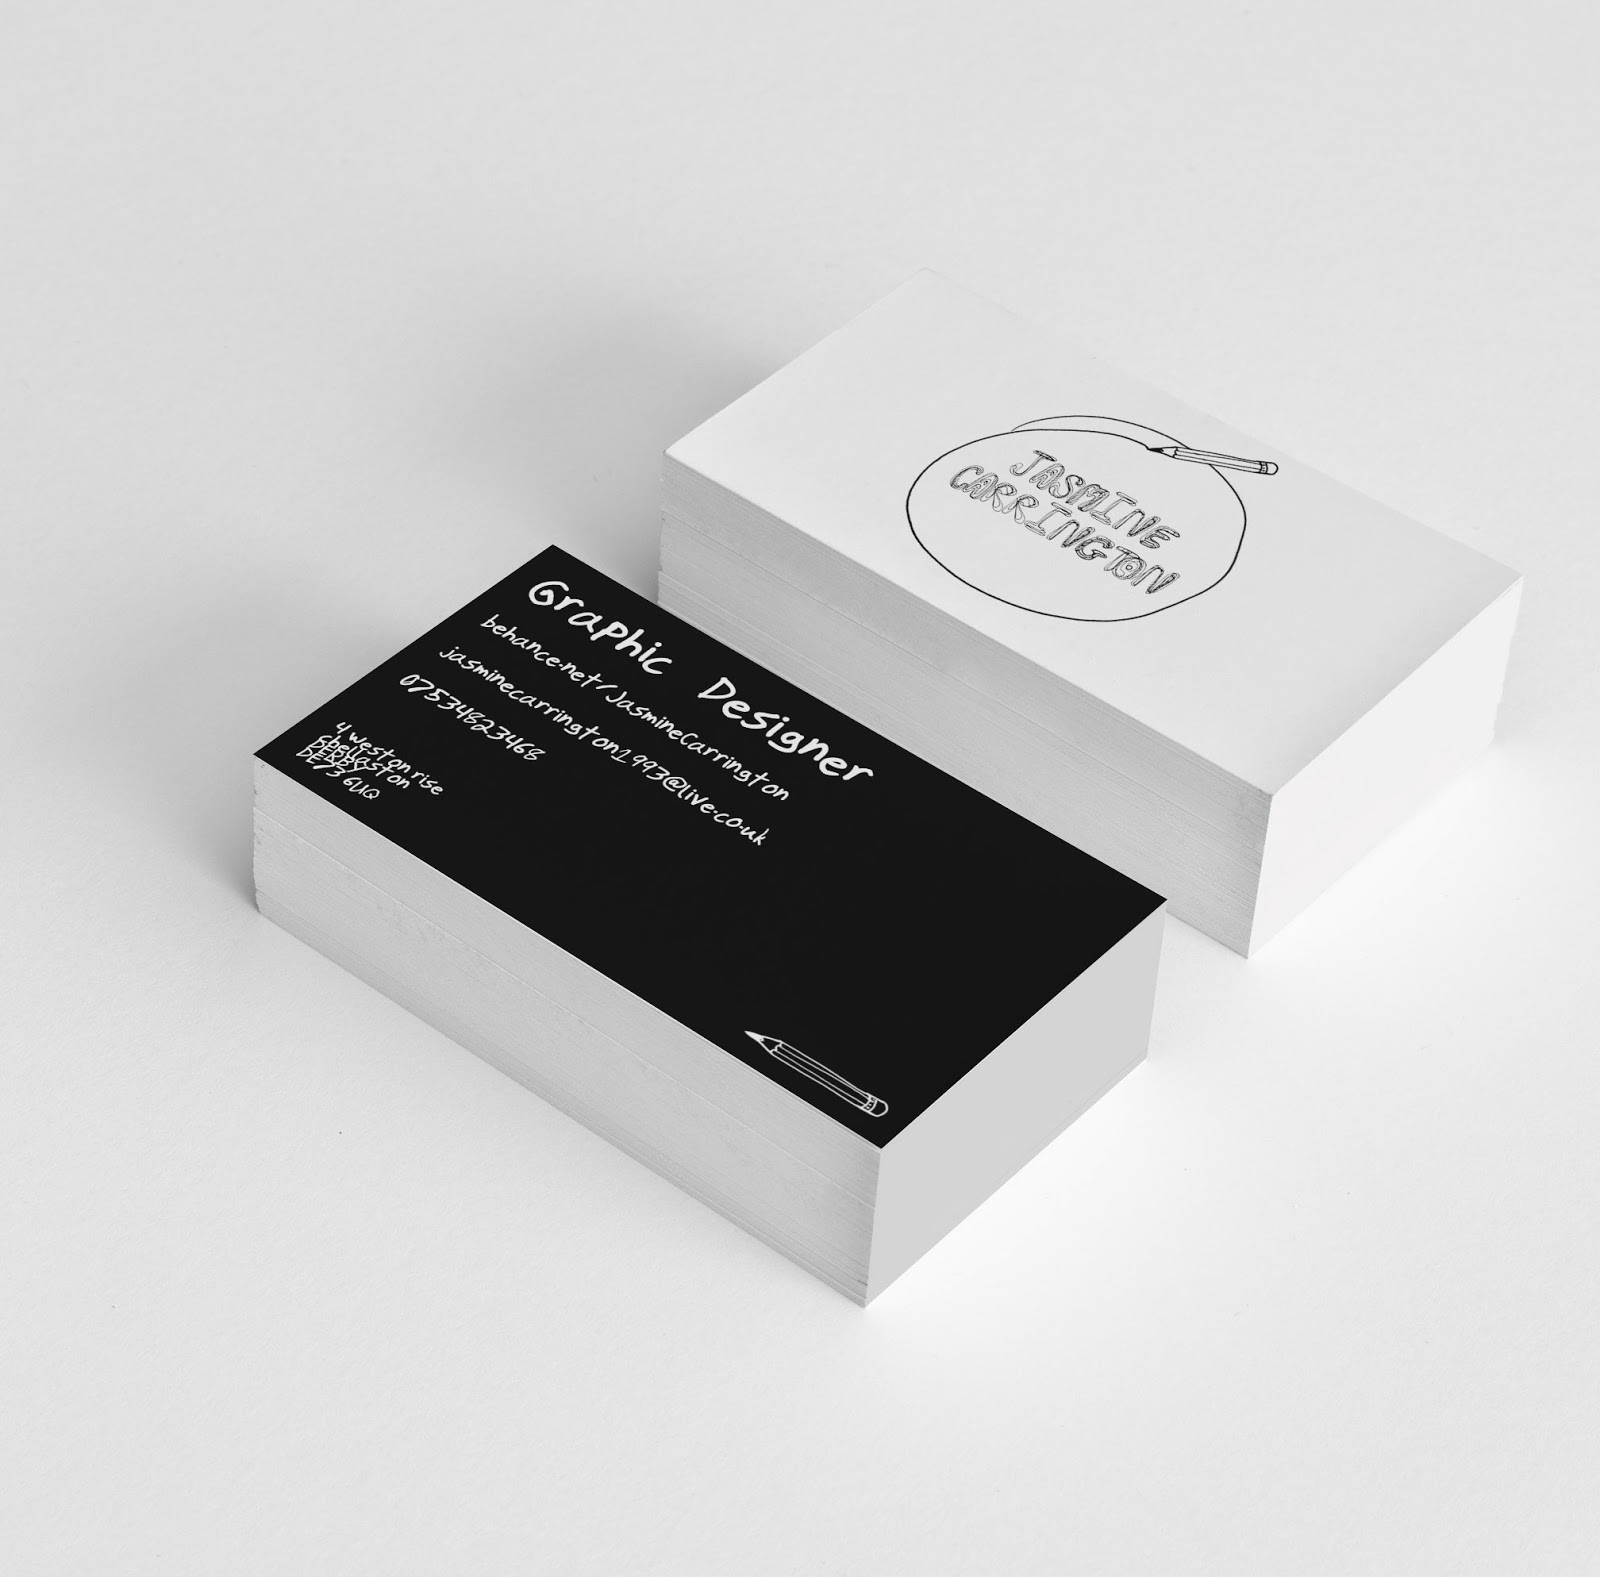 Reflective Business Cards: Making a Lasting Impression - BusinessCards